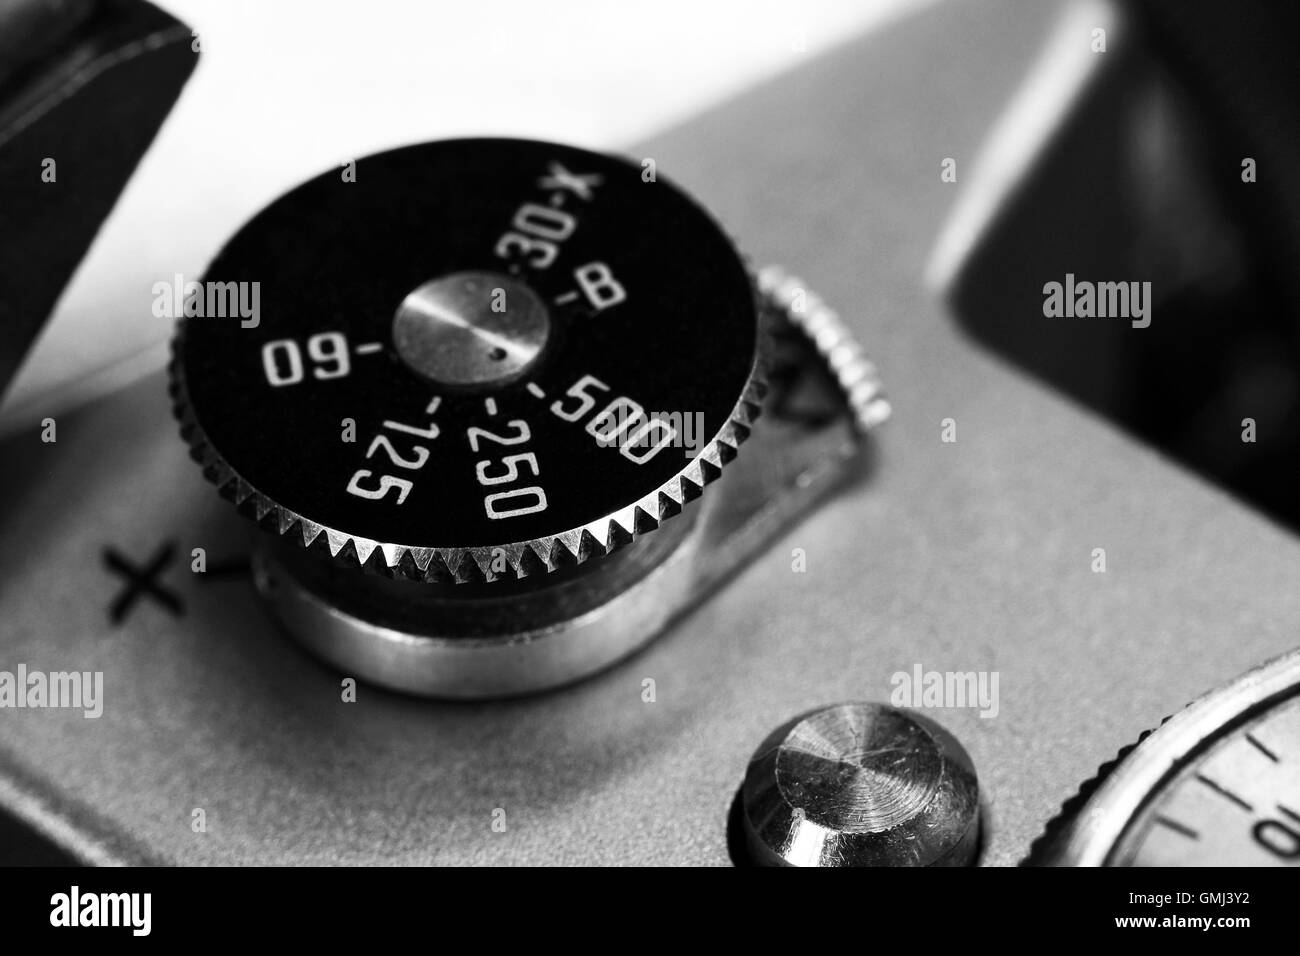 Old russiam camera shutter speed buttons close up Stock Photo